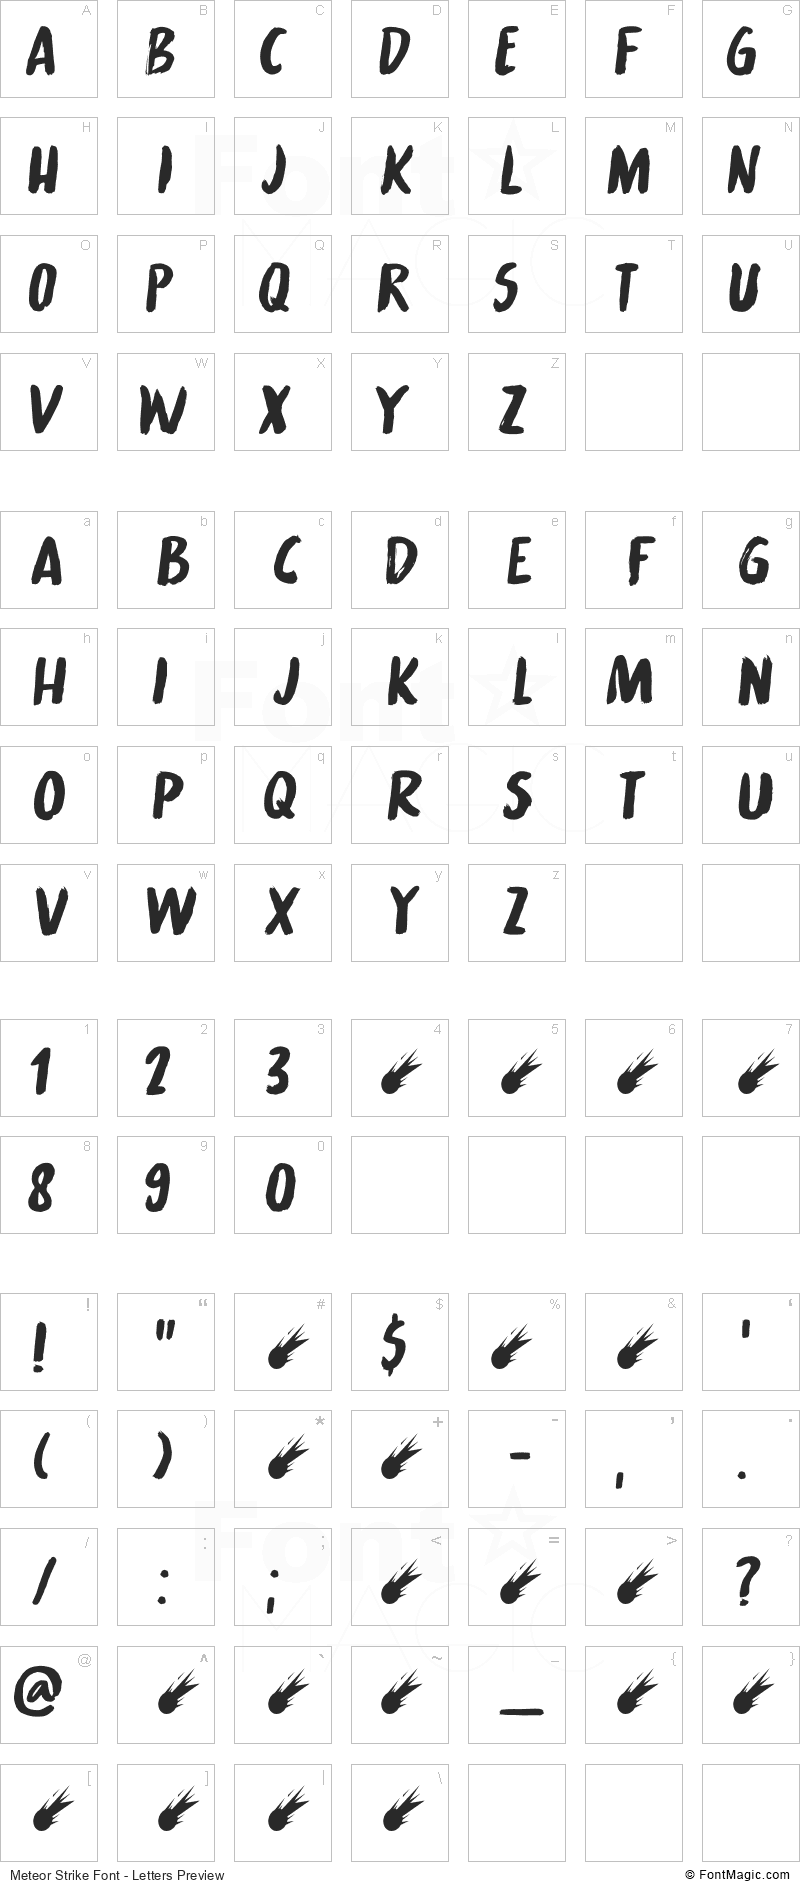 Meteor Strike Font - All Latters Preview Chart